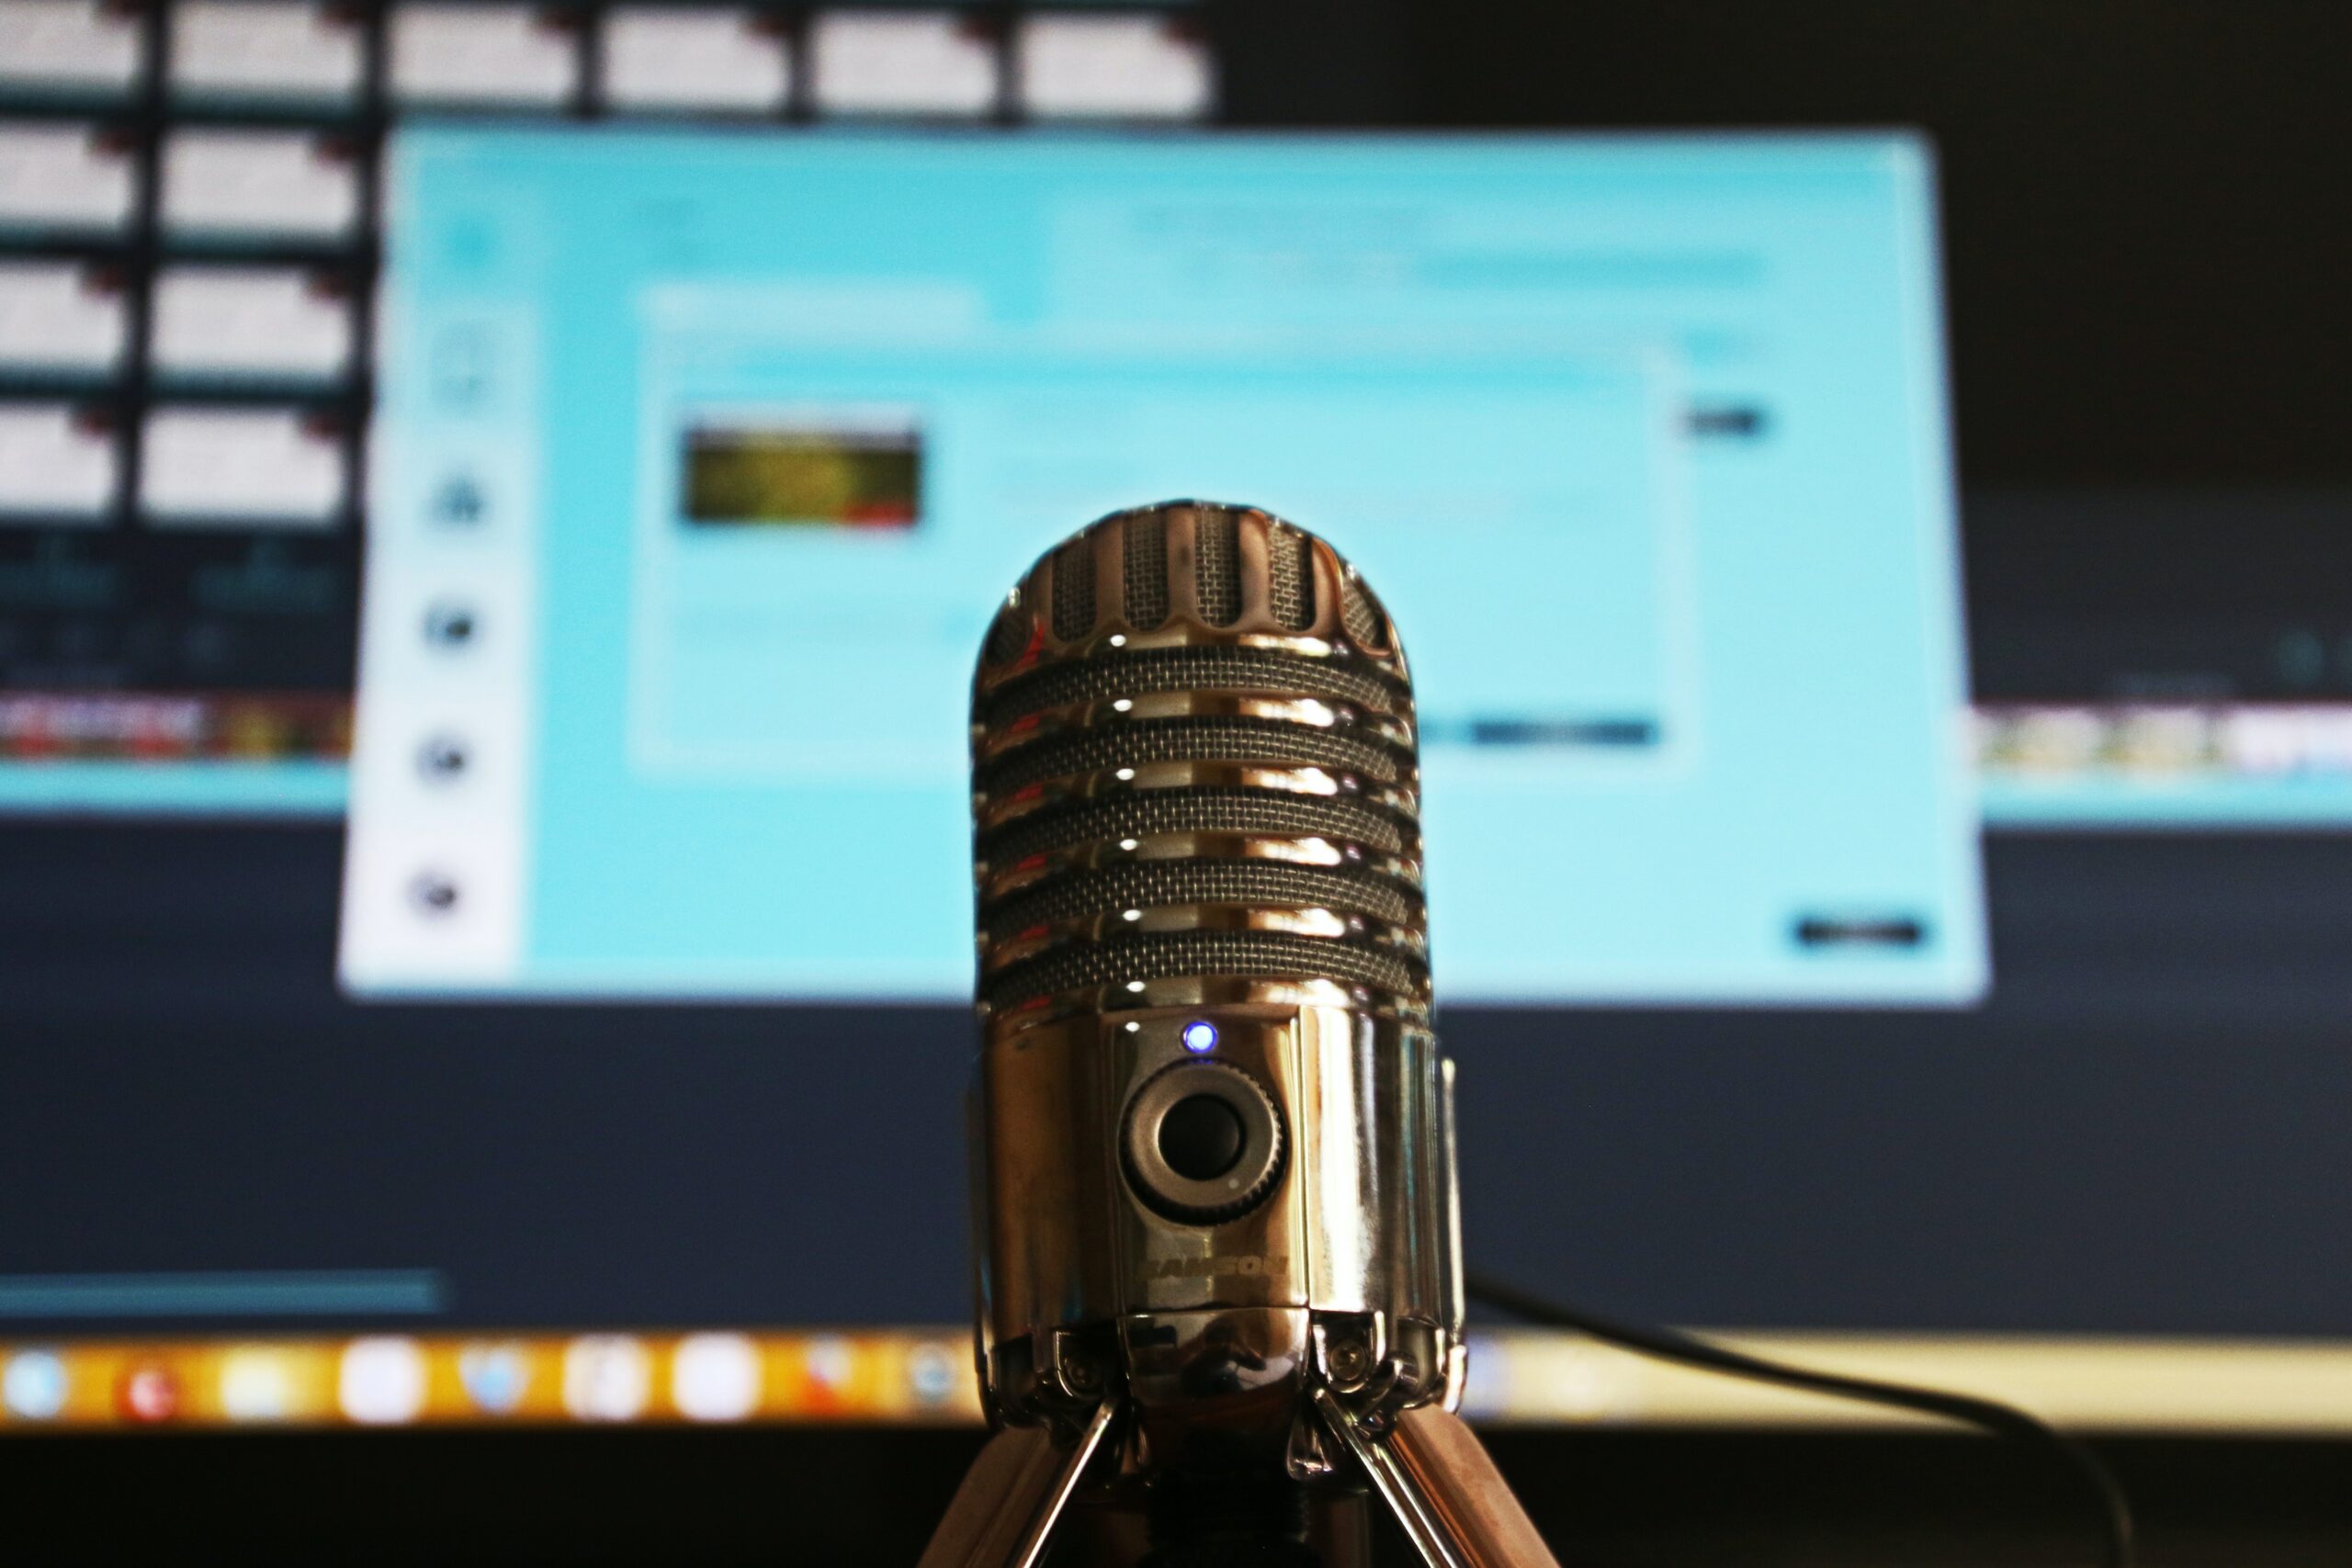 microphone in front of laptop